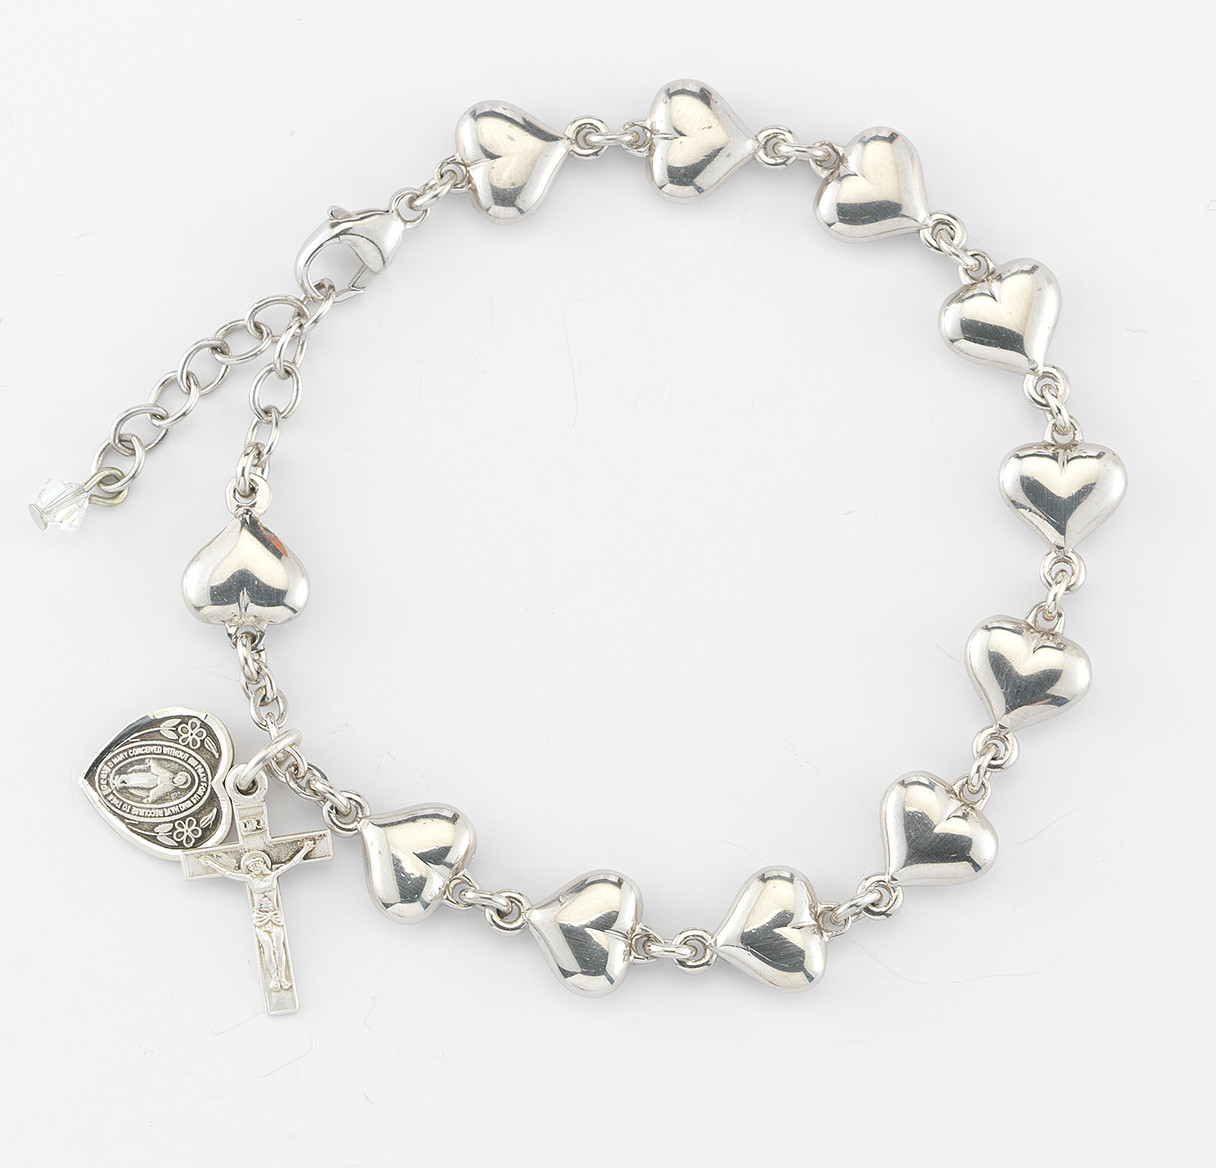 Adorable First Communion Crystal Rosary Bracelet